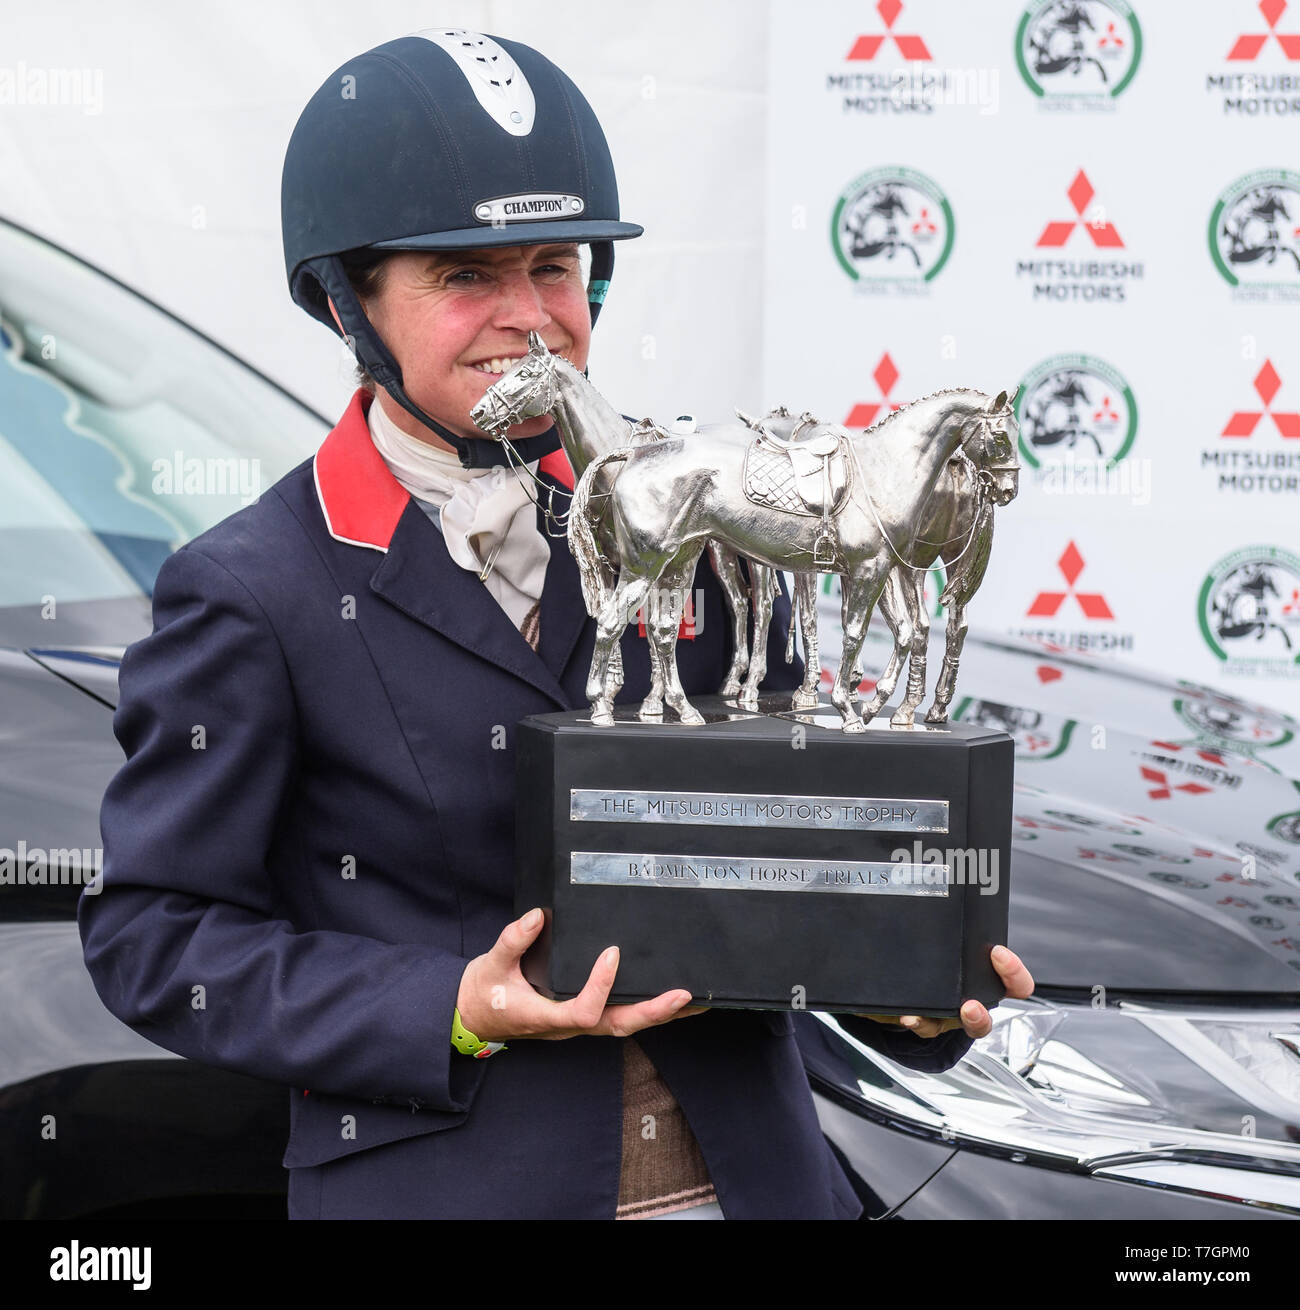 Piggy French during the Prize Giving, Mitsubishi Motors Badminton Horse Trials, Gloucestershire, 2019 Stock Photo